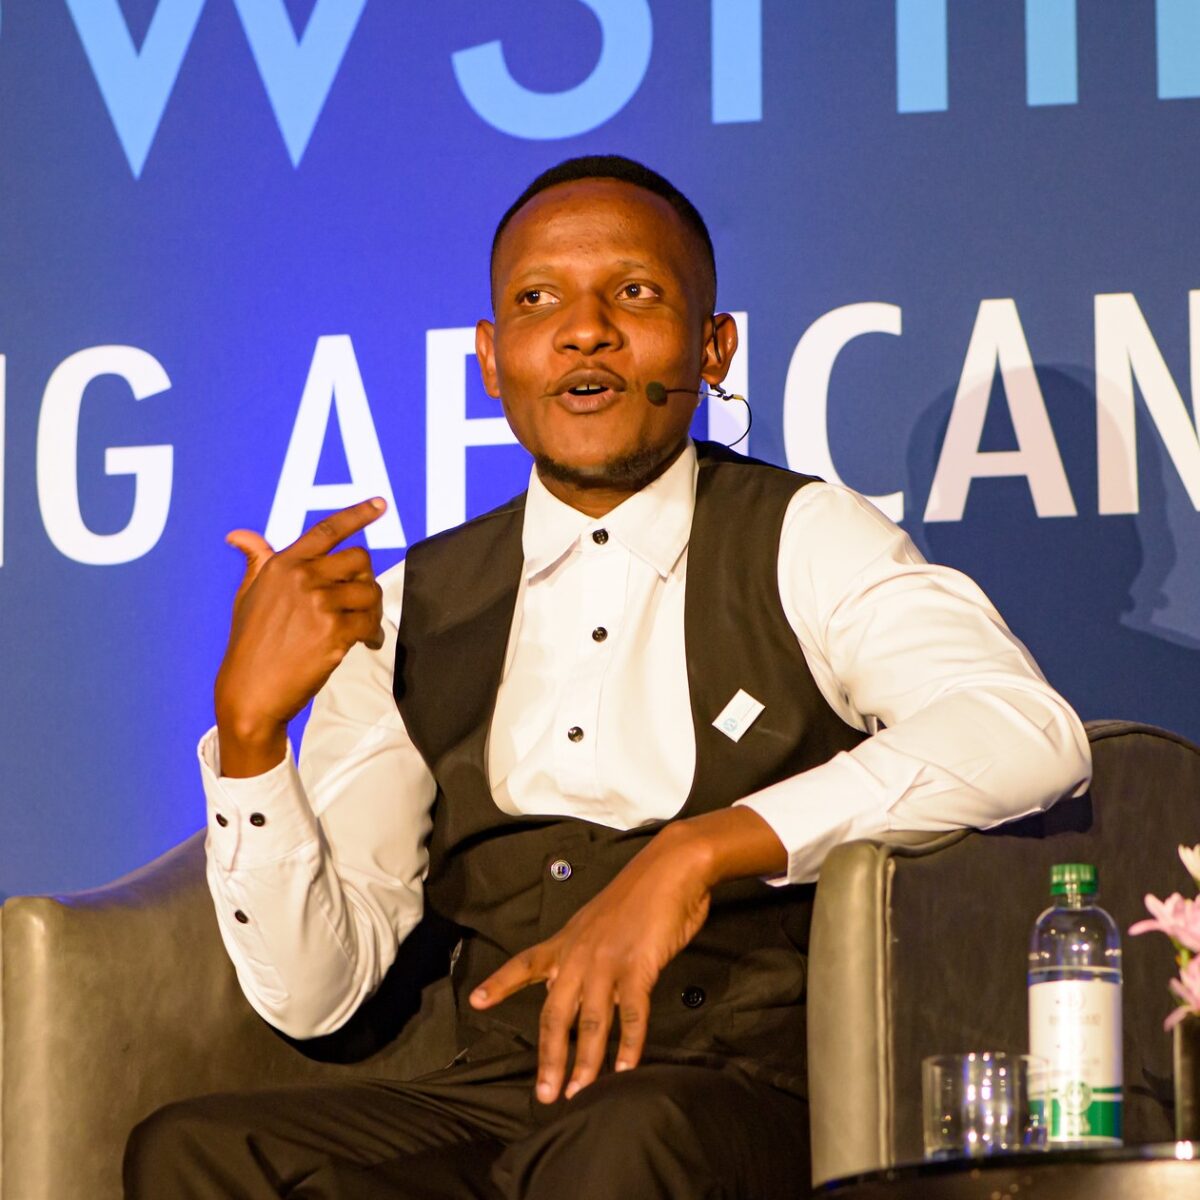 Candid photo of a man in business formal dress speaking on stage, seated in a chair